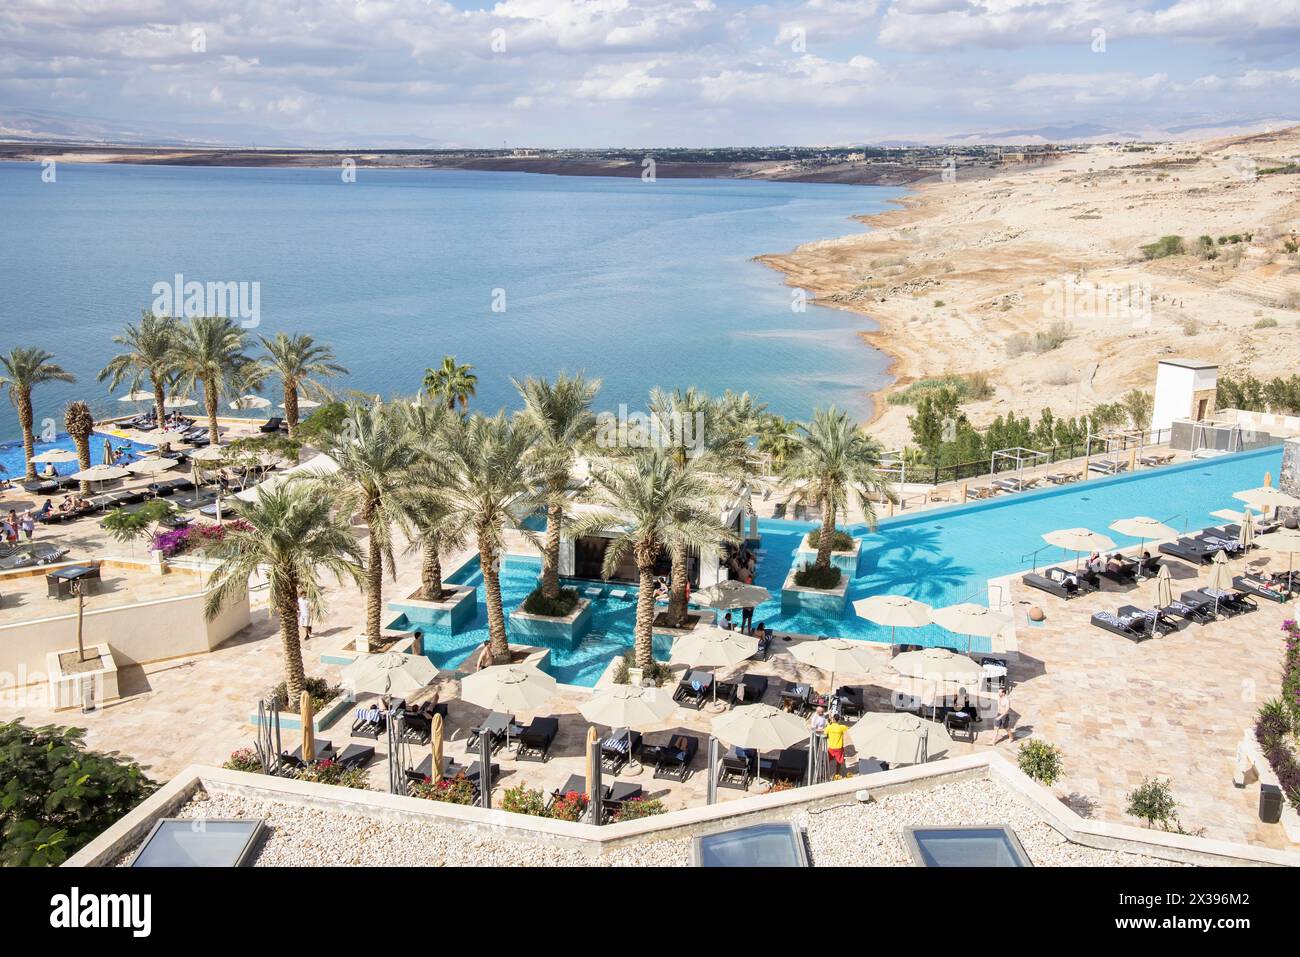 the hilton dead sea resort on the shores of the dead sea is the lowest point on earth at 400 feet below sea level in jordan Stock Photo